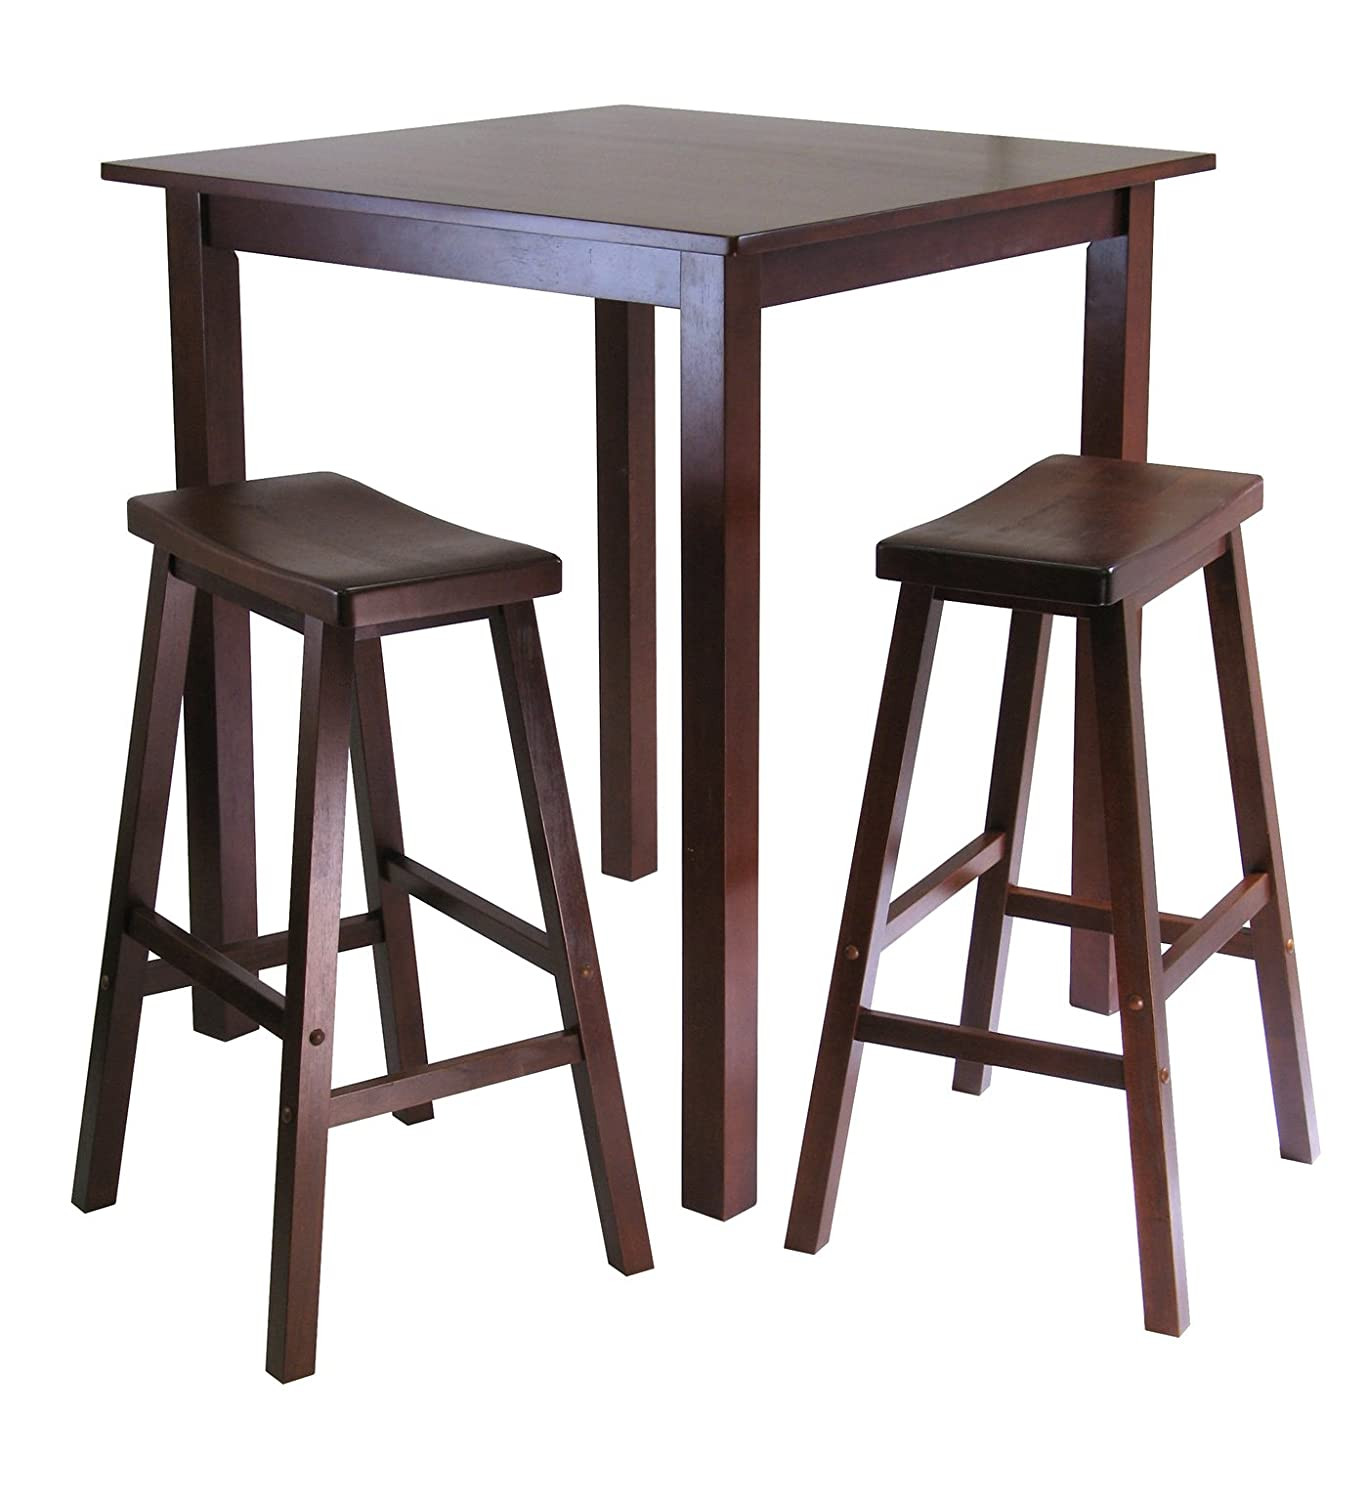 Small High top Kitchen Table Luxury Small Kitchen Table Sets